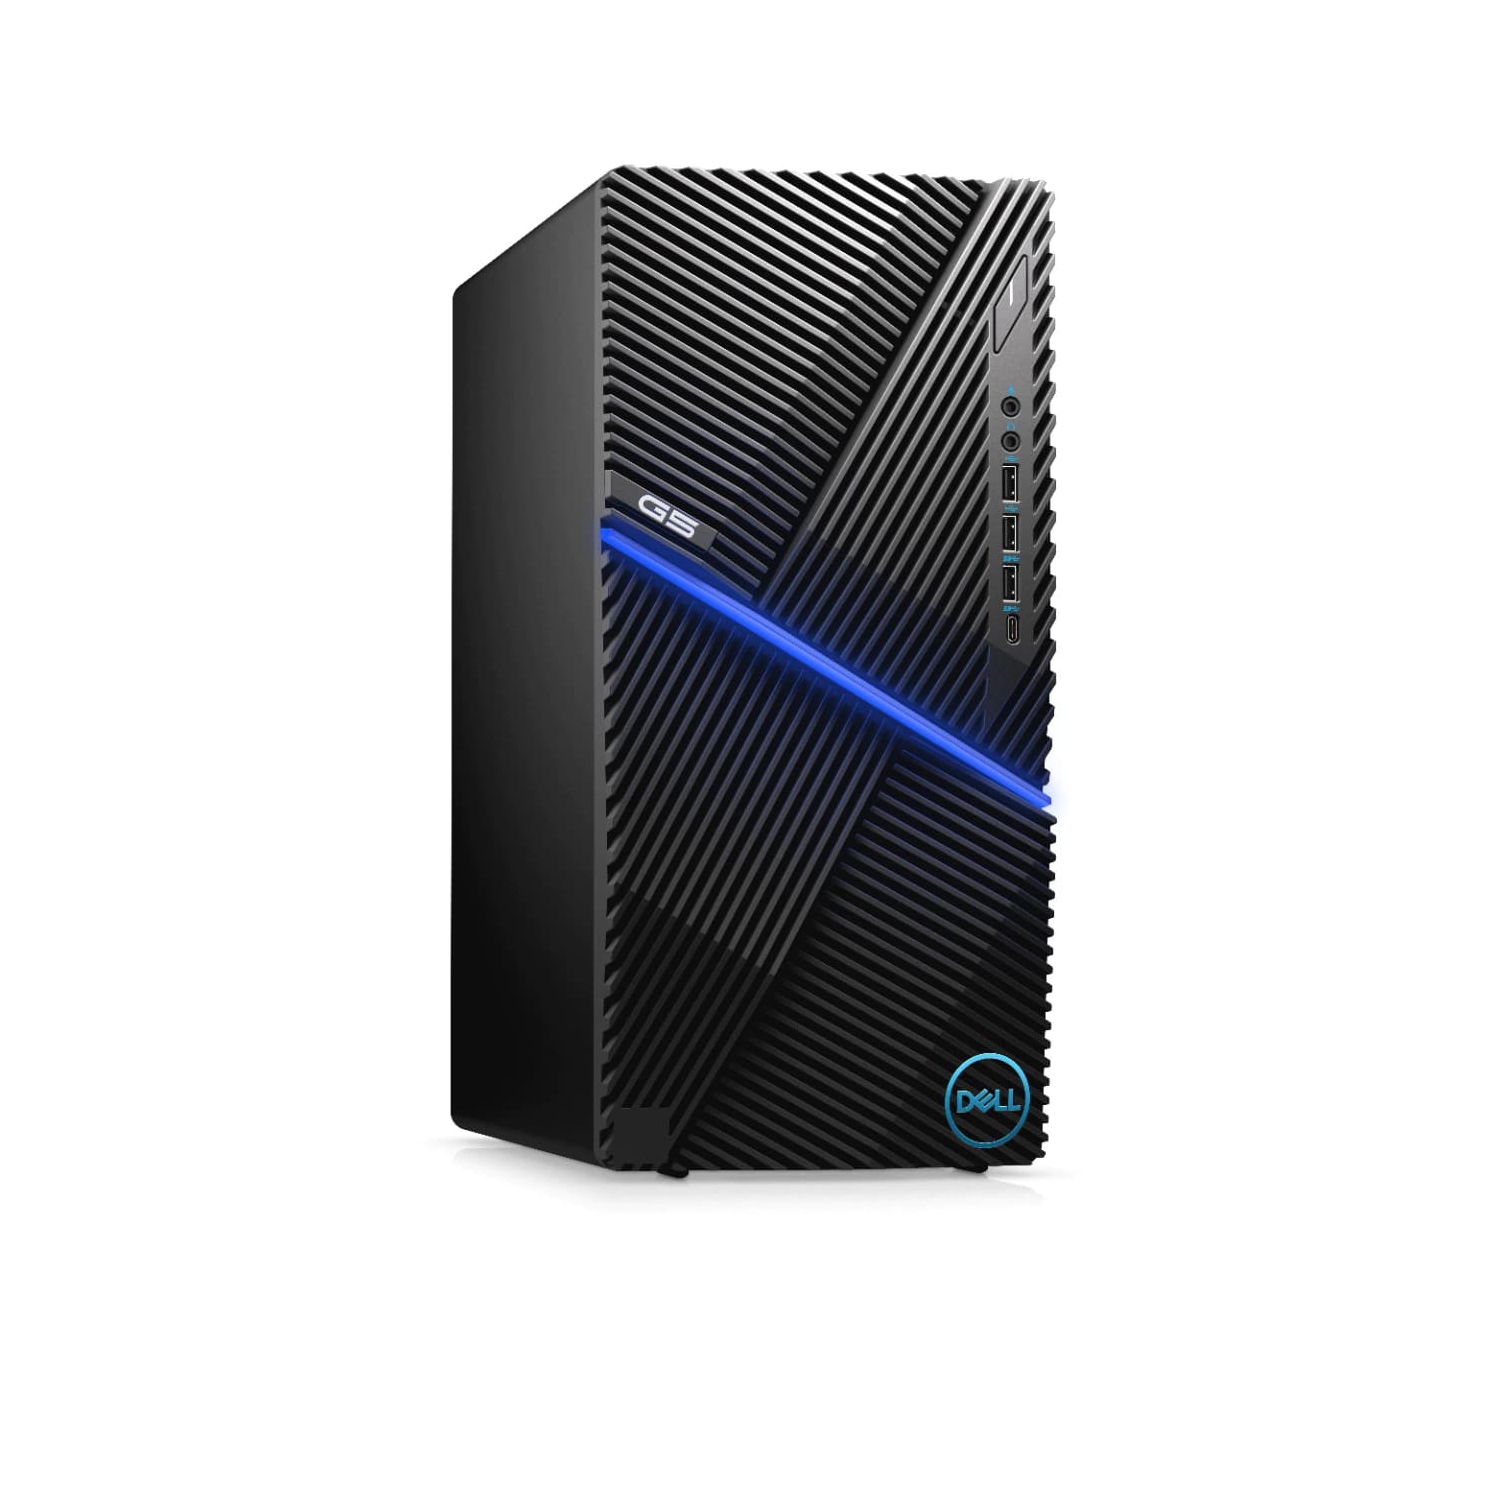 Refurbished (Excellent) - Dell G5 5000 Gaming Desktop (2020) | Core i7 - 1TB SSD - 32GB RAM - 2070 Super | 8 Cores @ 5.1 GHz - 10th Gen CPU Certified Refurbished